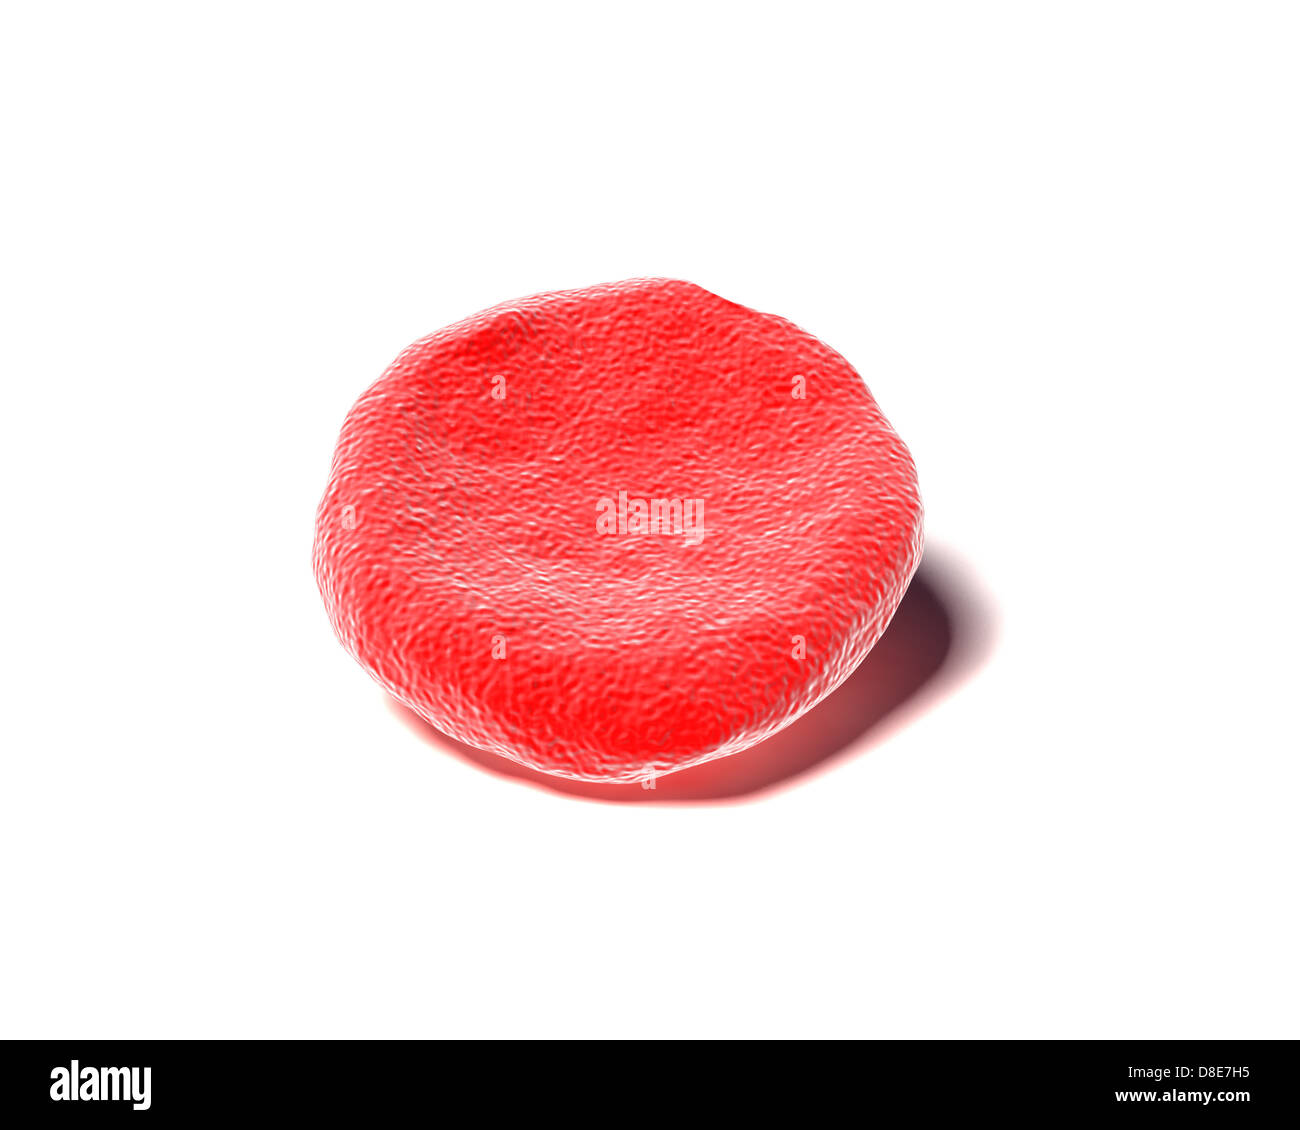 Illustration of a red blood cell Stock Photo